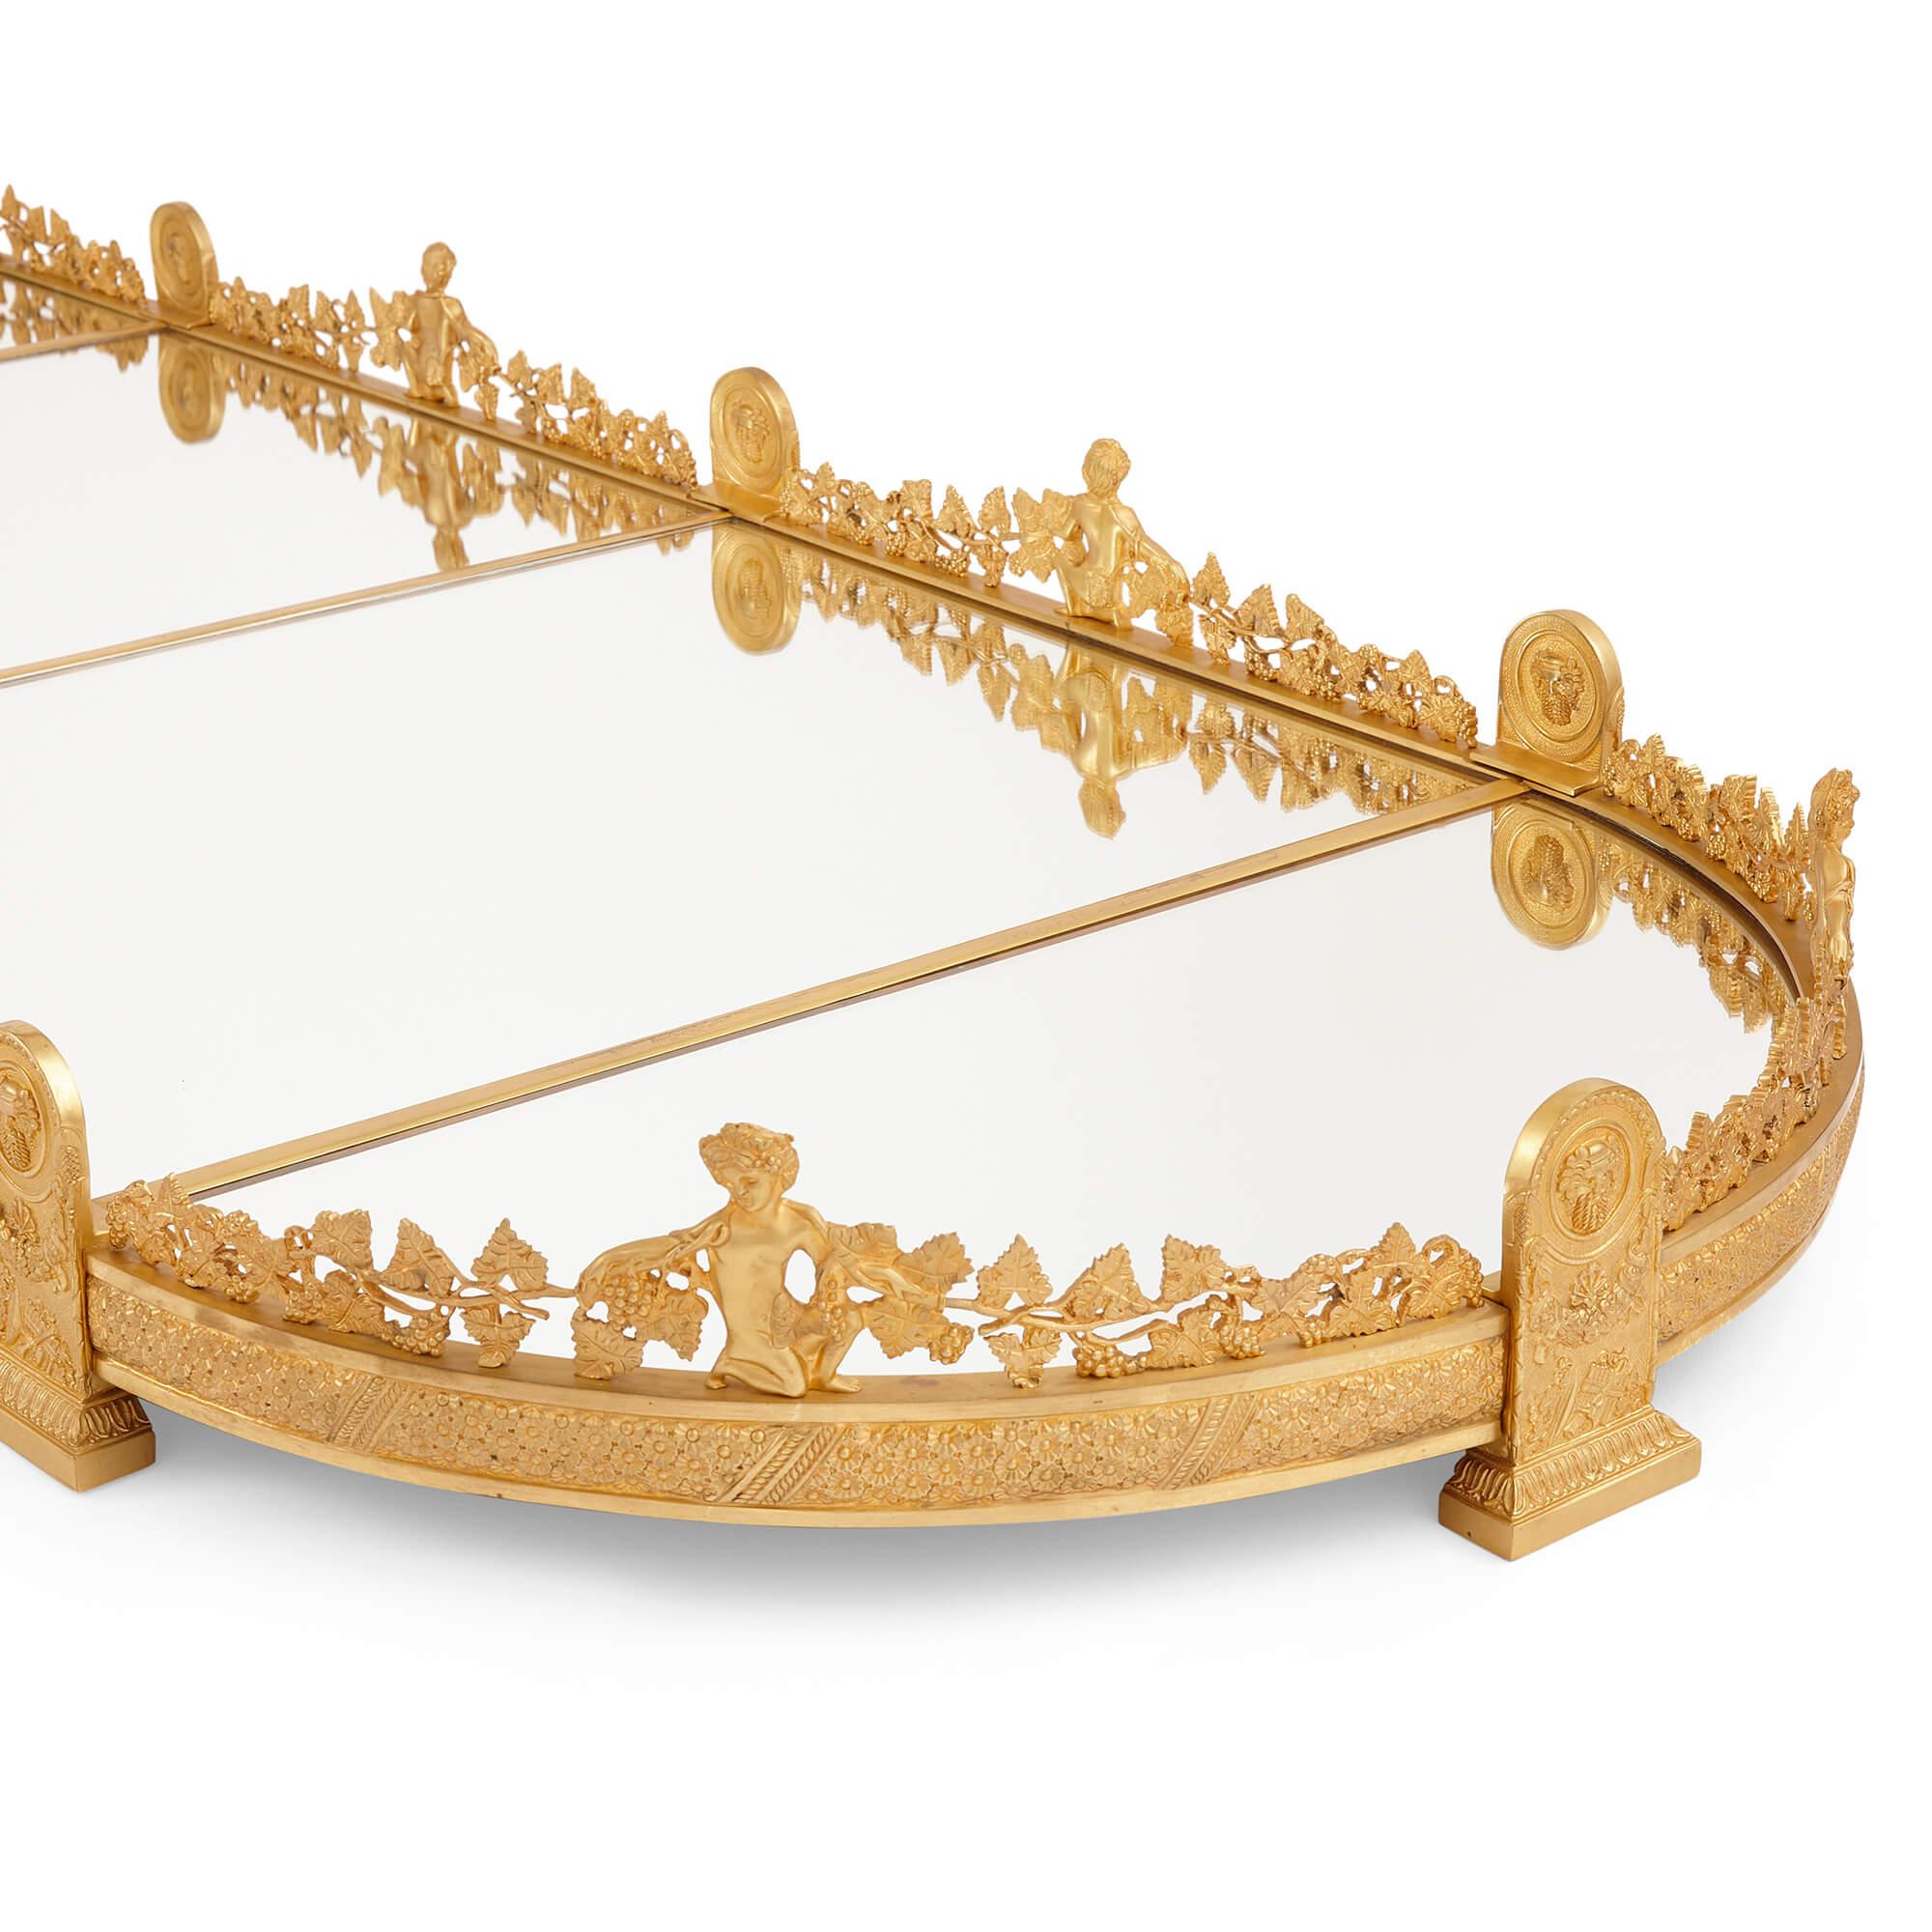 Empire style gilt bronze and mirror surtout de table centrepiece 
French, 20th Century
Height 13.5cm, width 318cm, depth 66.5cm

This French-crafted table centrepiece, or 'surtout de table,' stands as a testament to the heritage of European grand